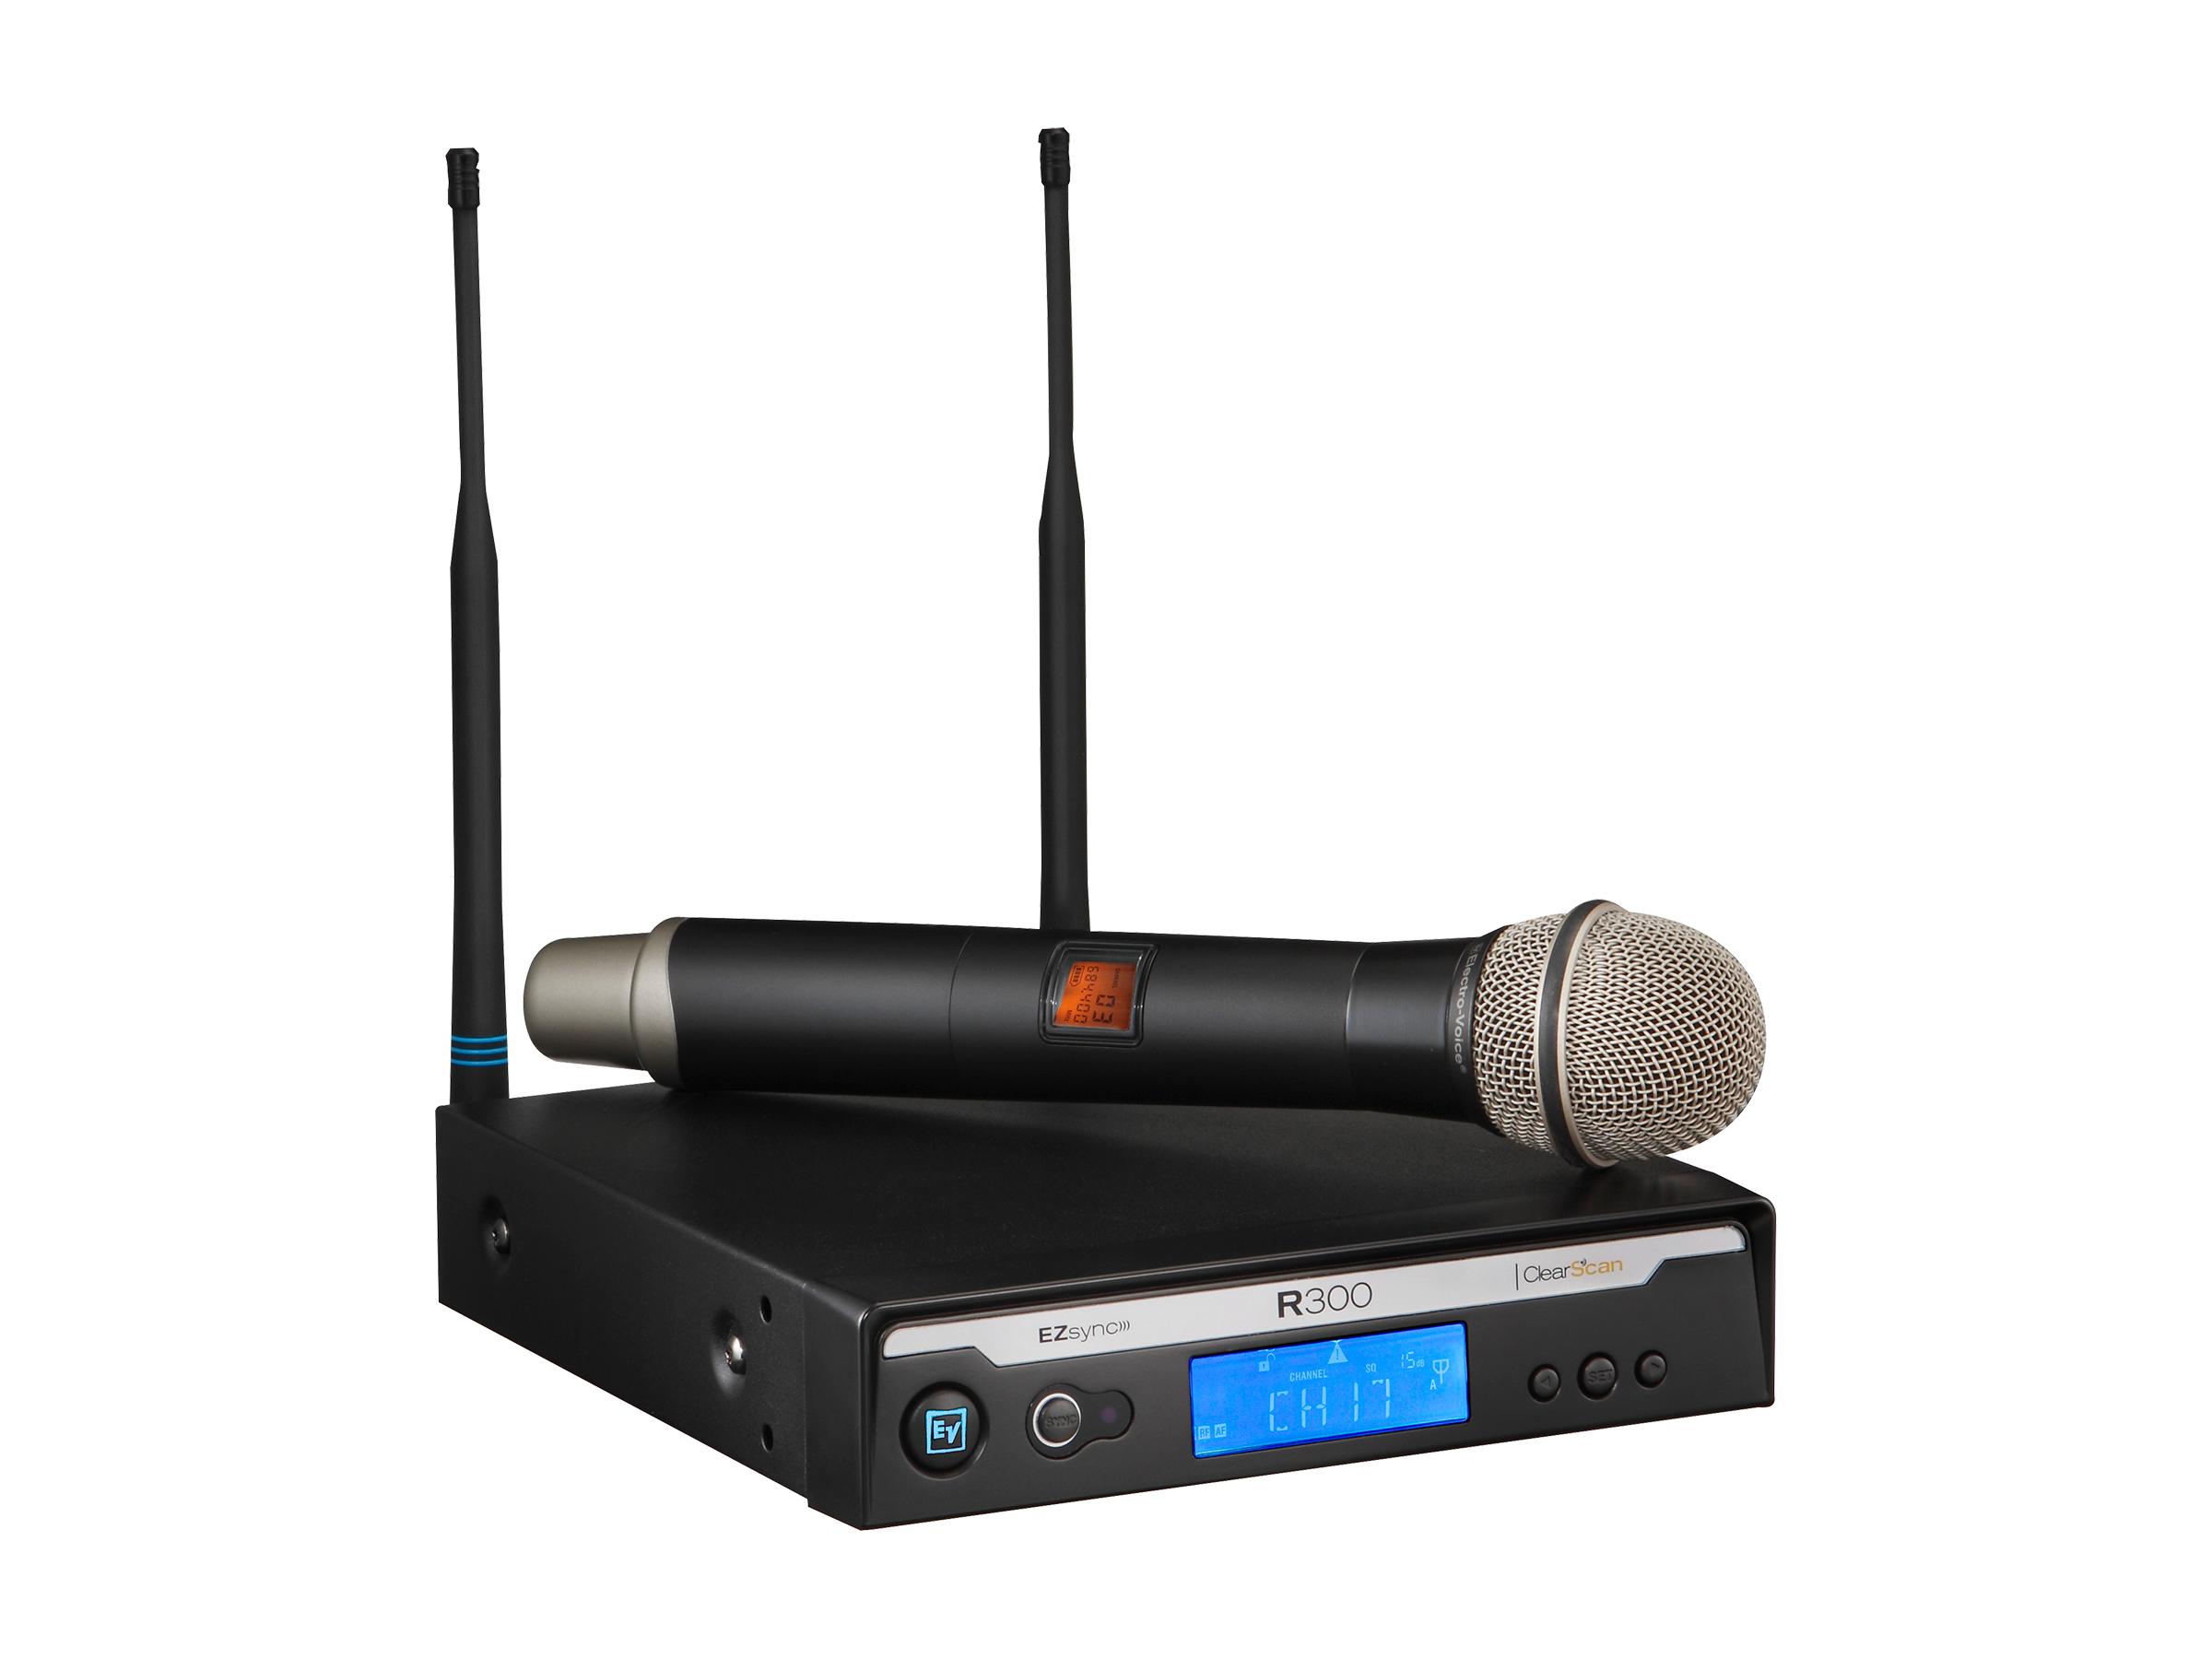 R300HDC R300 Series Wireless Dynamic Cardioid PL22 Handheld Microphone System C-Band/516-532 MHz by Electro-Voice